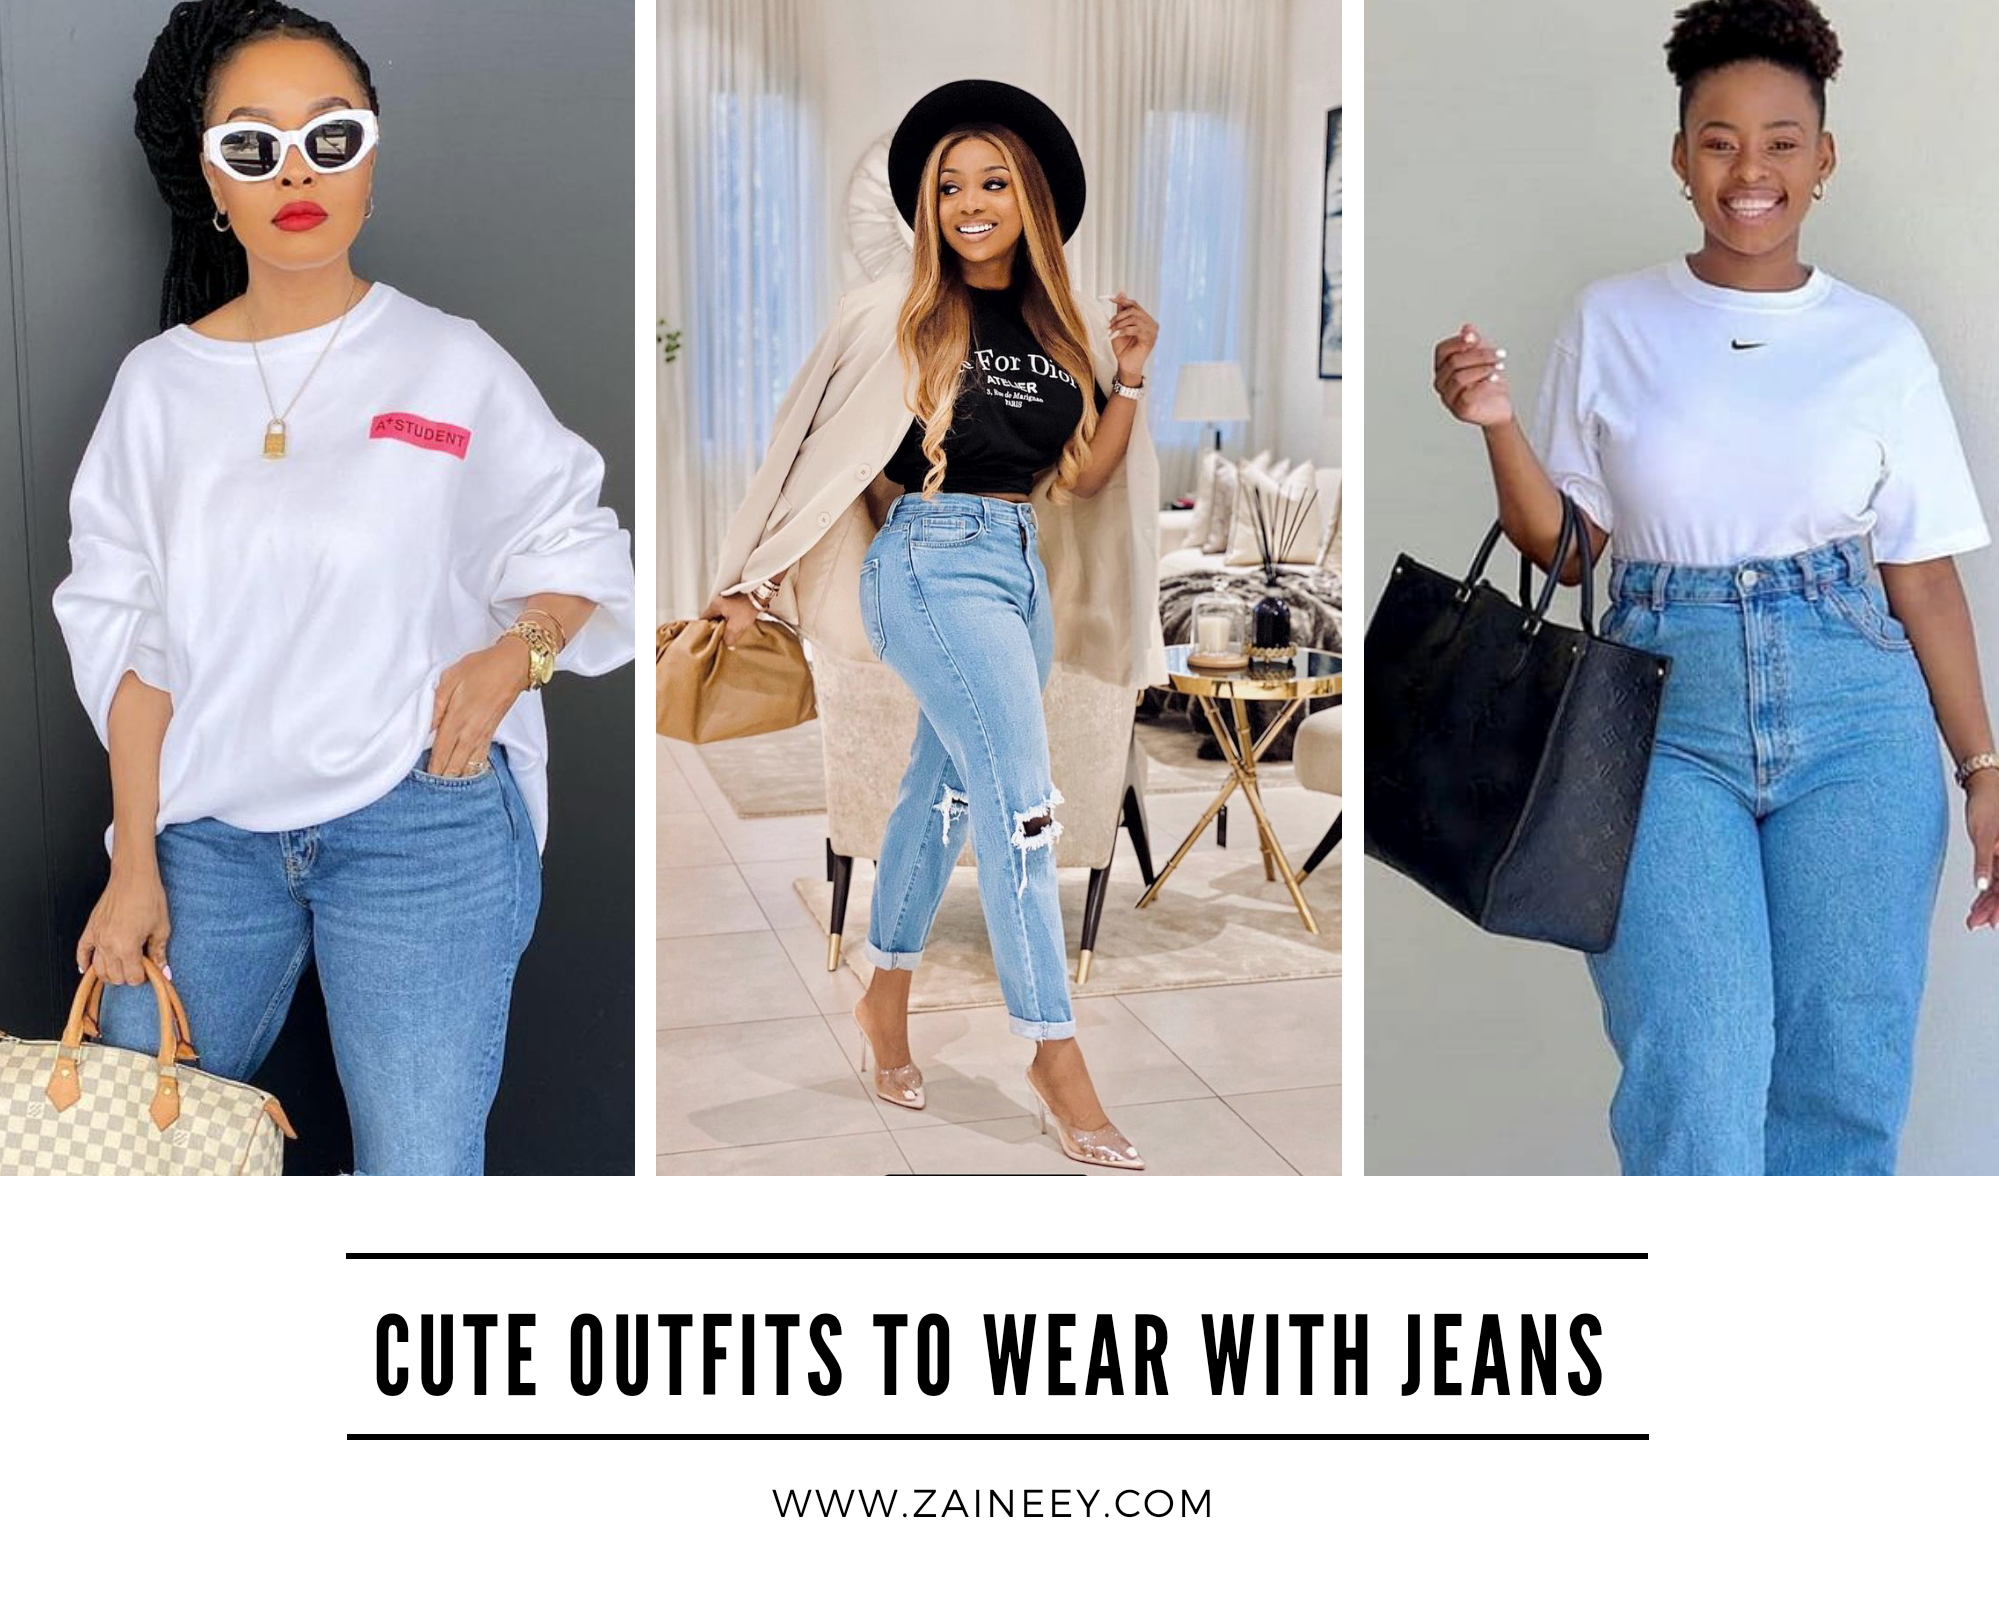 Cute outfits to wear with jeans 2021